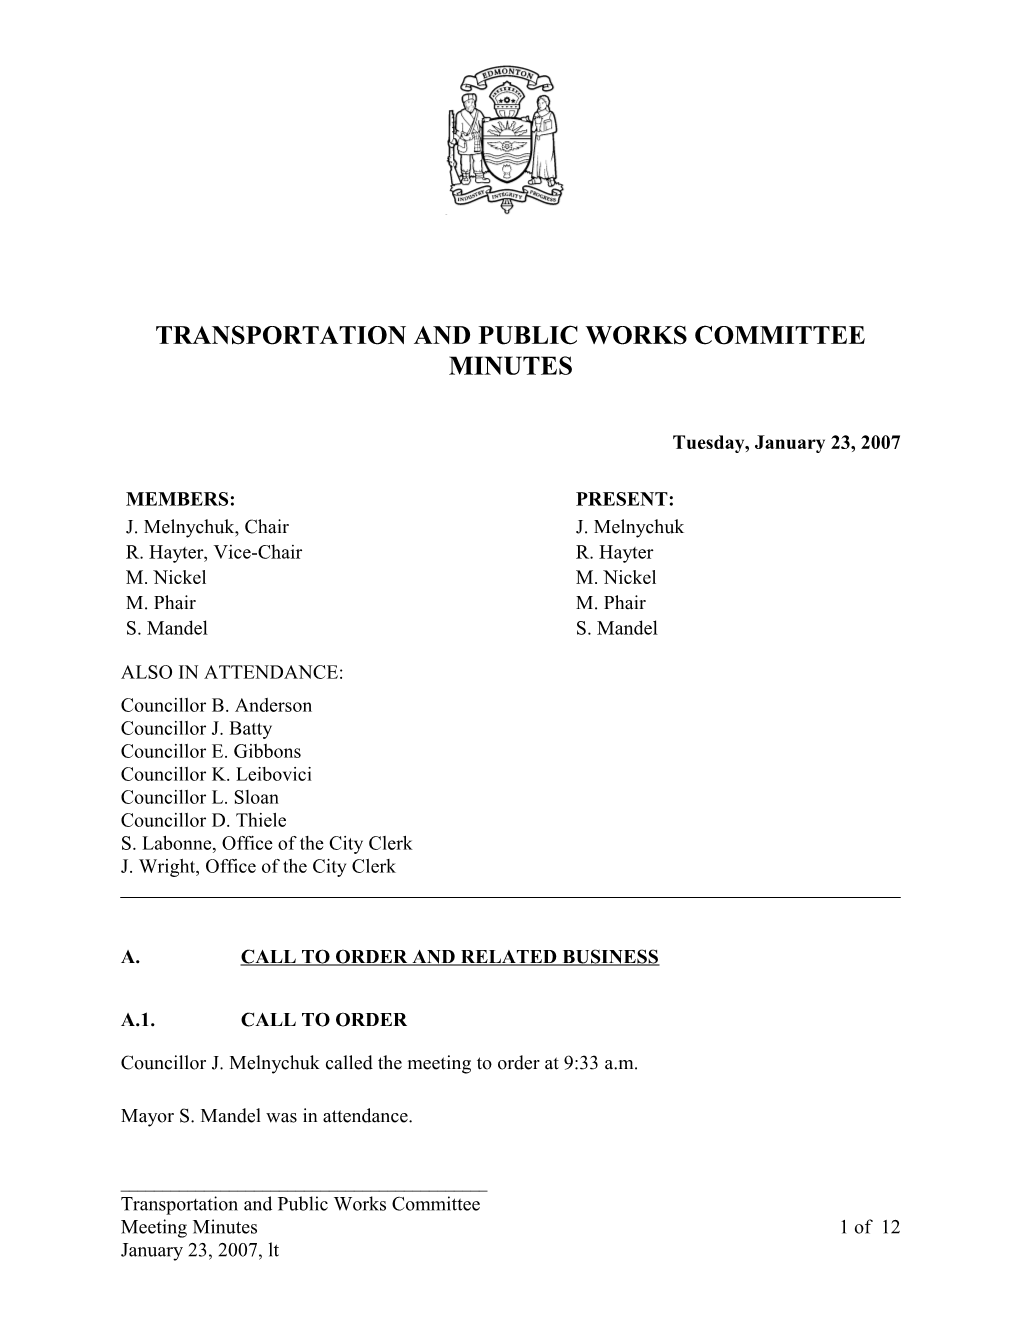 Minutes for Transportation and Public Works Committee January 23, 2007 Meeting